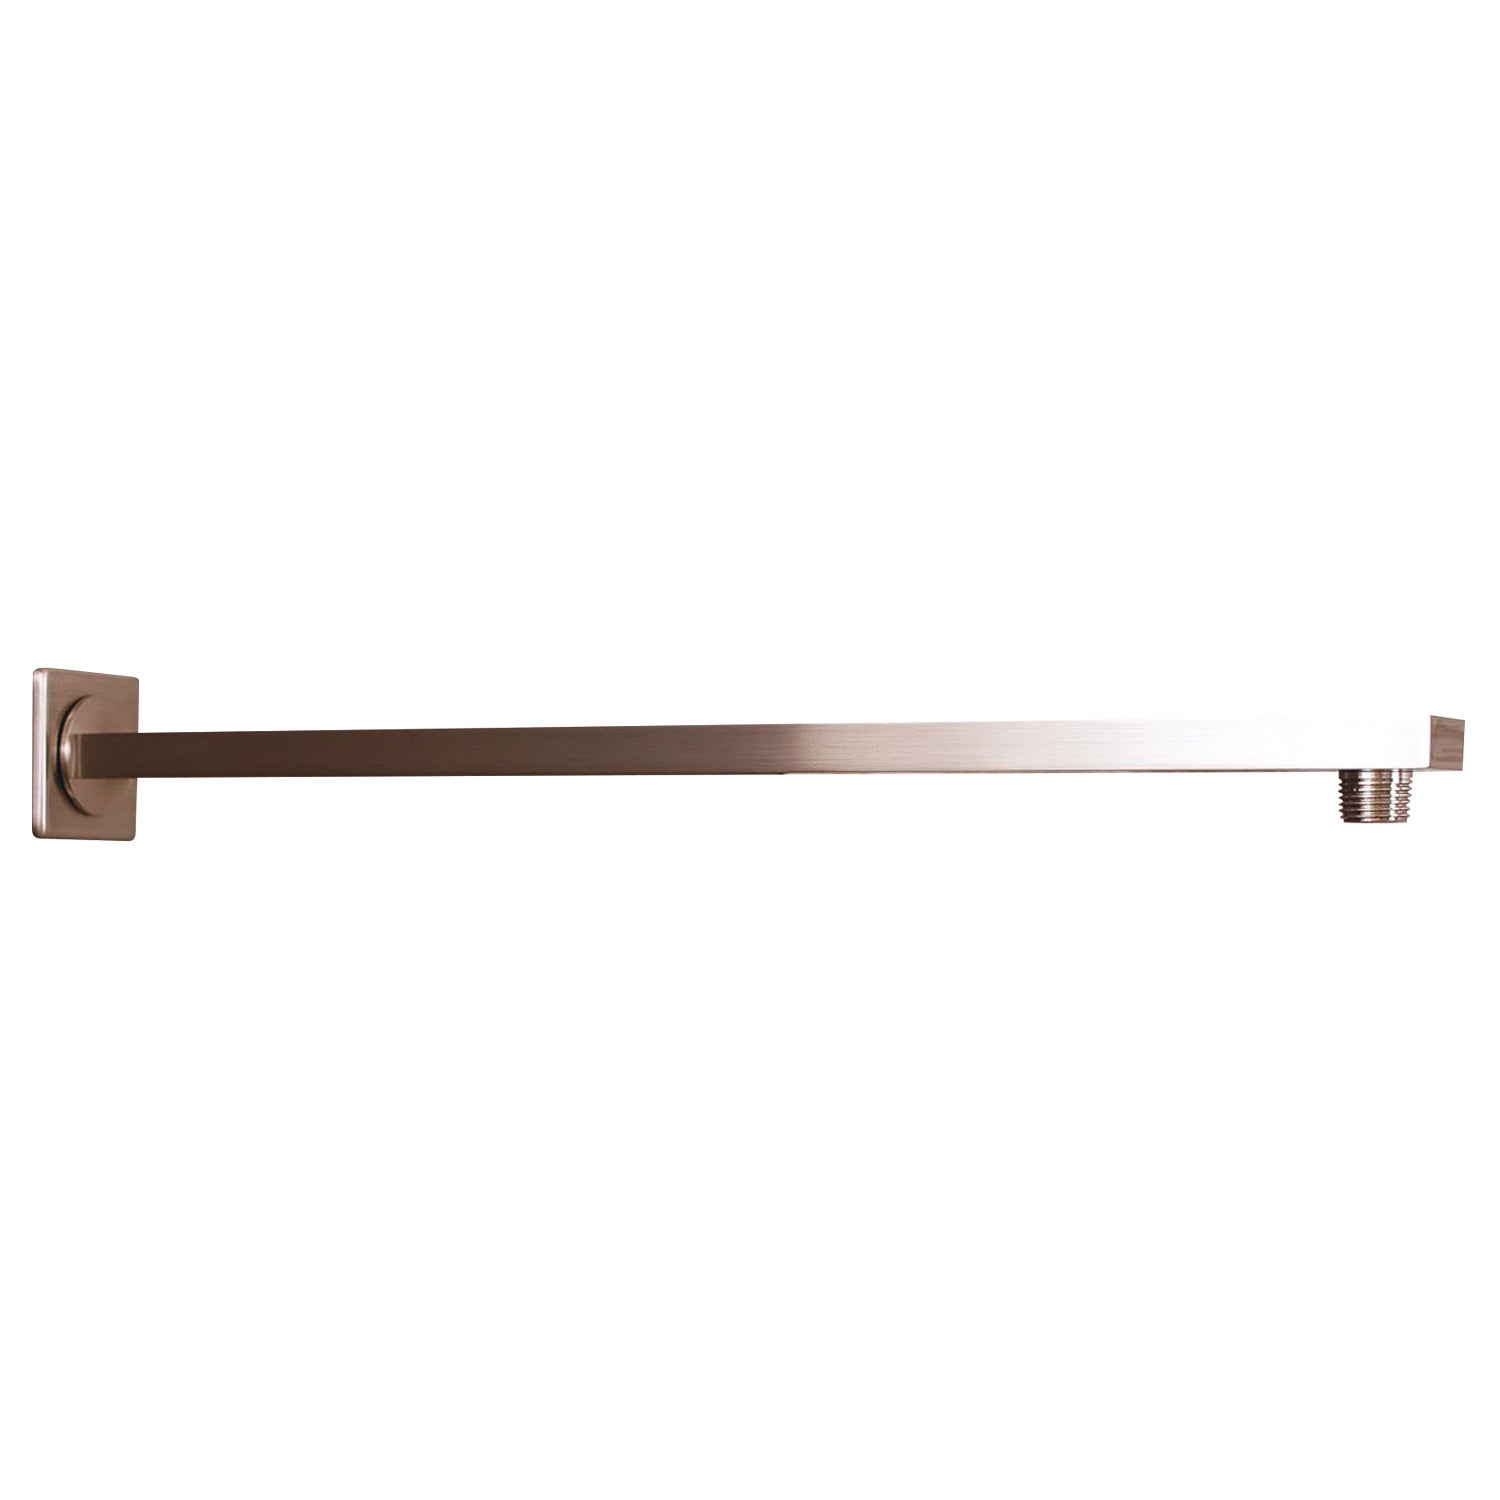 DAX Square Shower Arm, Spout, Brass Body, Wall Mount, Brushed Nickel Finish, 12 Inches (D-F20-12-BN)